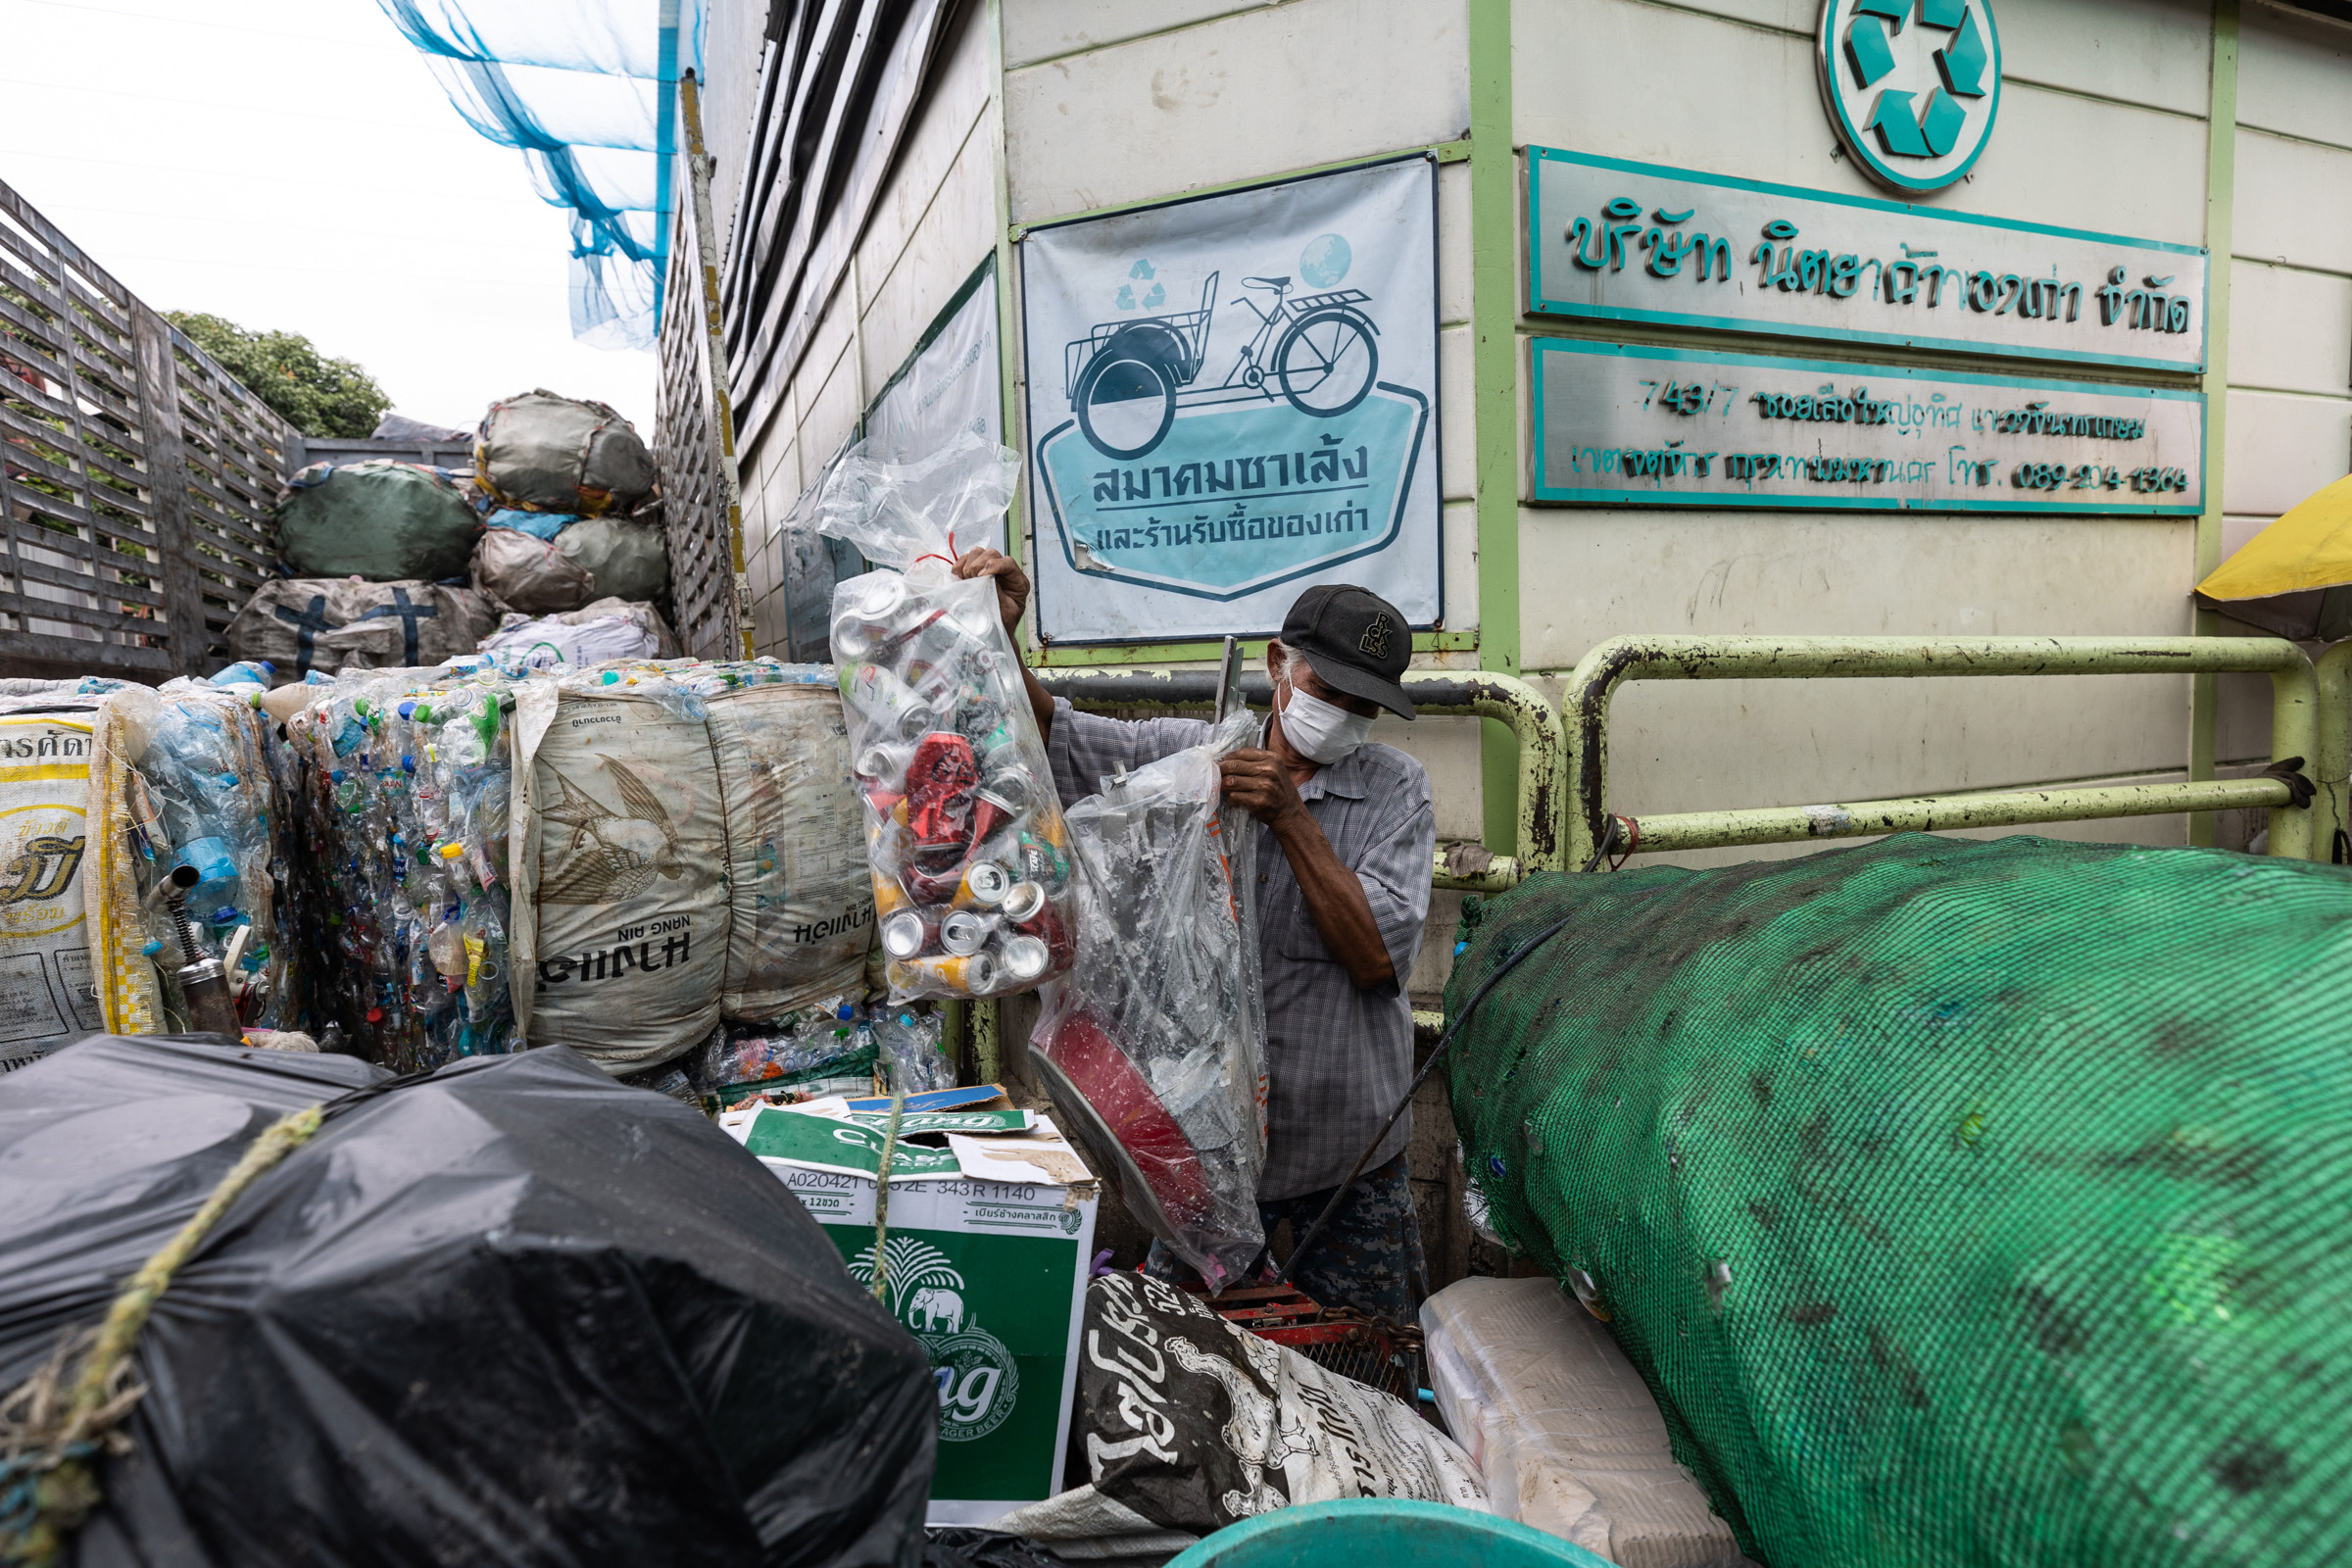 A saleng driver unloads his collected waste to be weighed